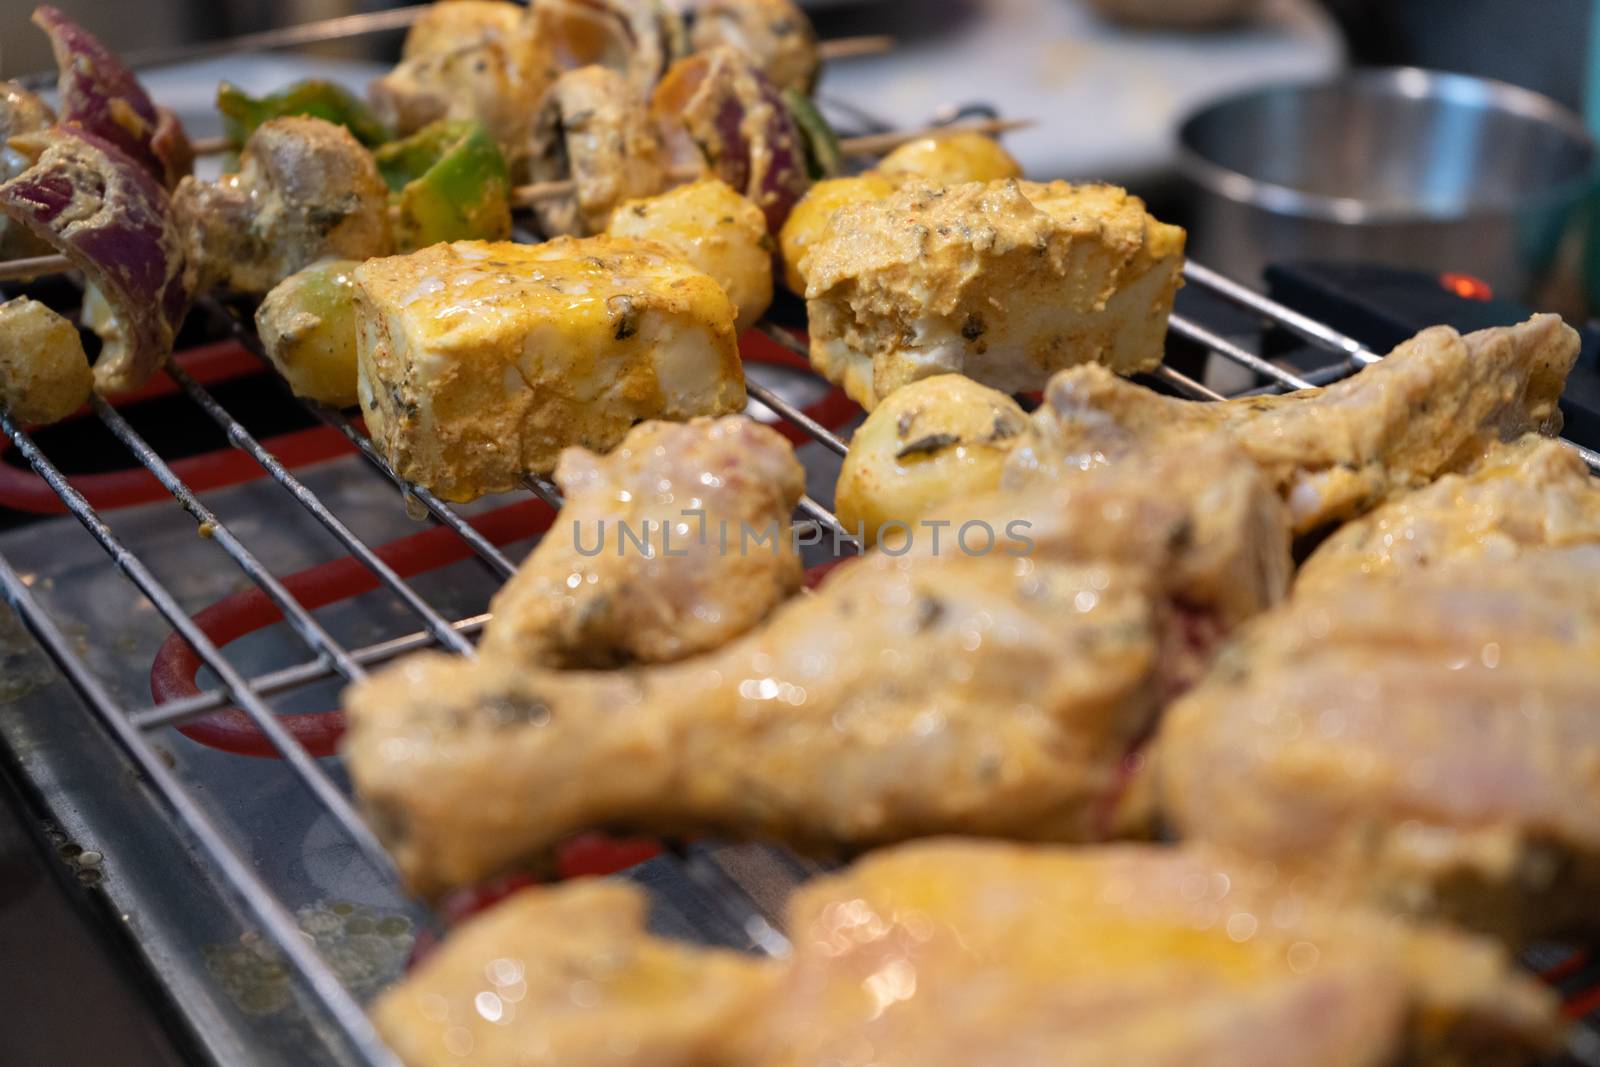 chicken marinated with oil and spices cooking on a hot electric grill making paneer tikka masala in an Indian home. Shows a tasty food that is very popular as a meal or as a snack street food